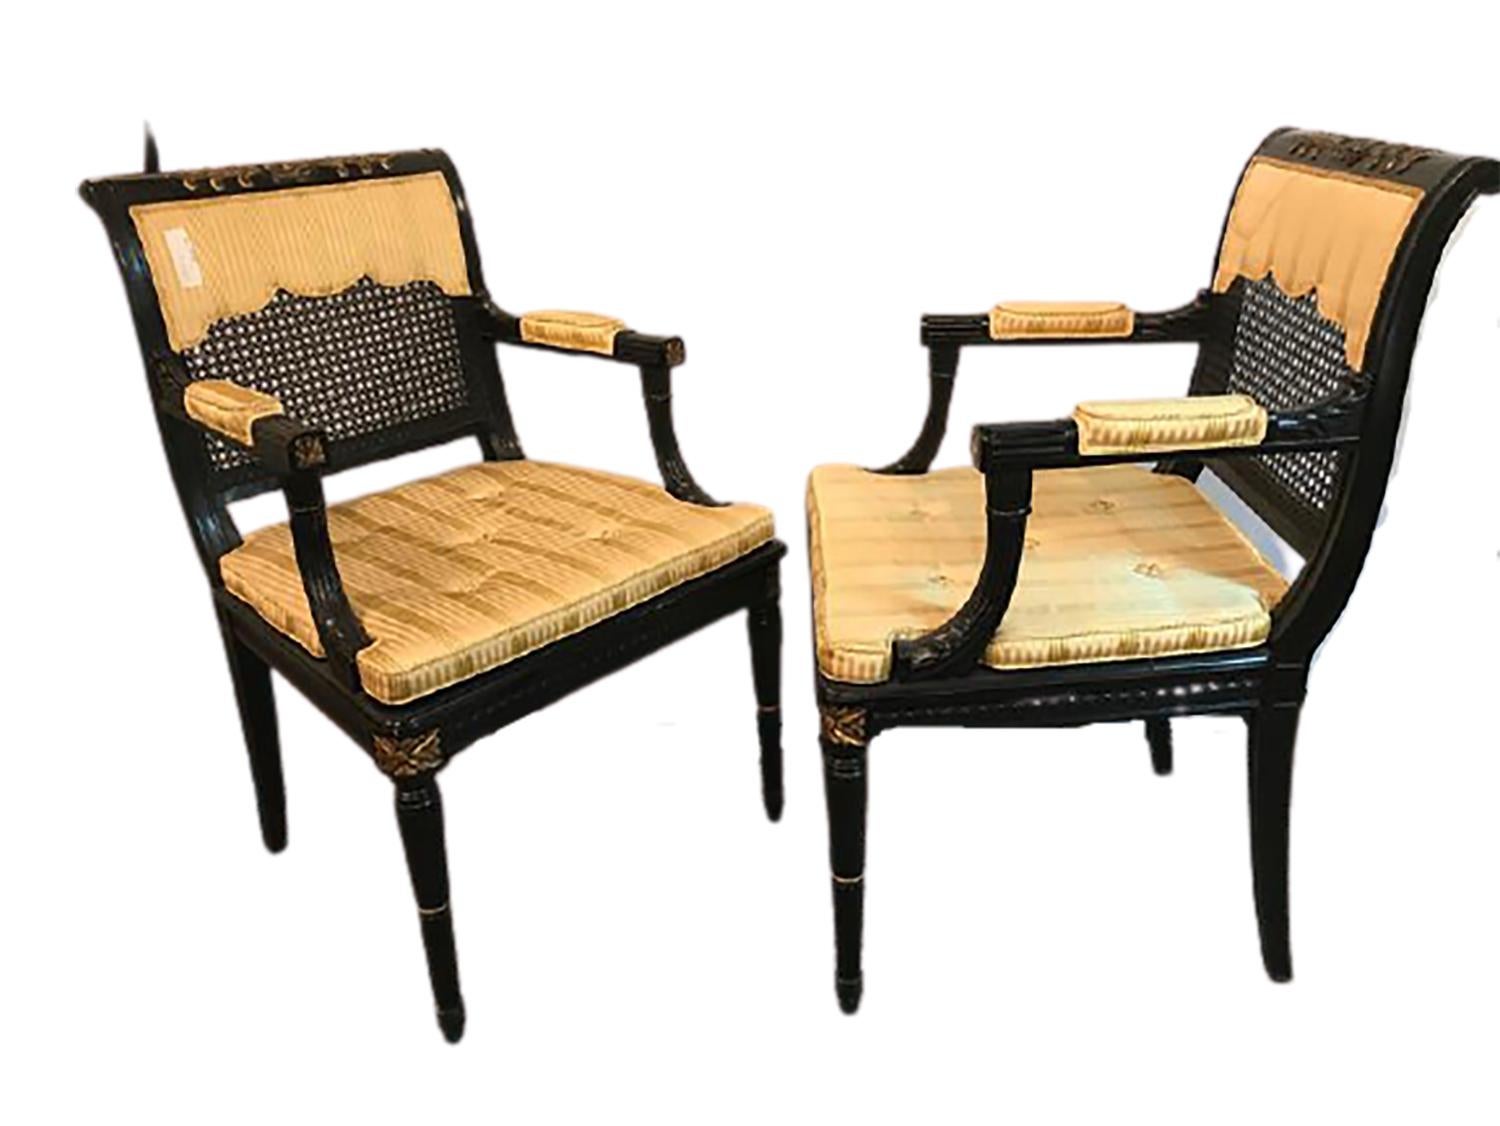 Hollywood Regency Jansen Style, Louis XVI, Arm Chairs, Black Lacquer, Fabric, Cane, France, 1930s For Sale